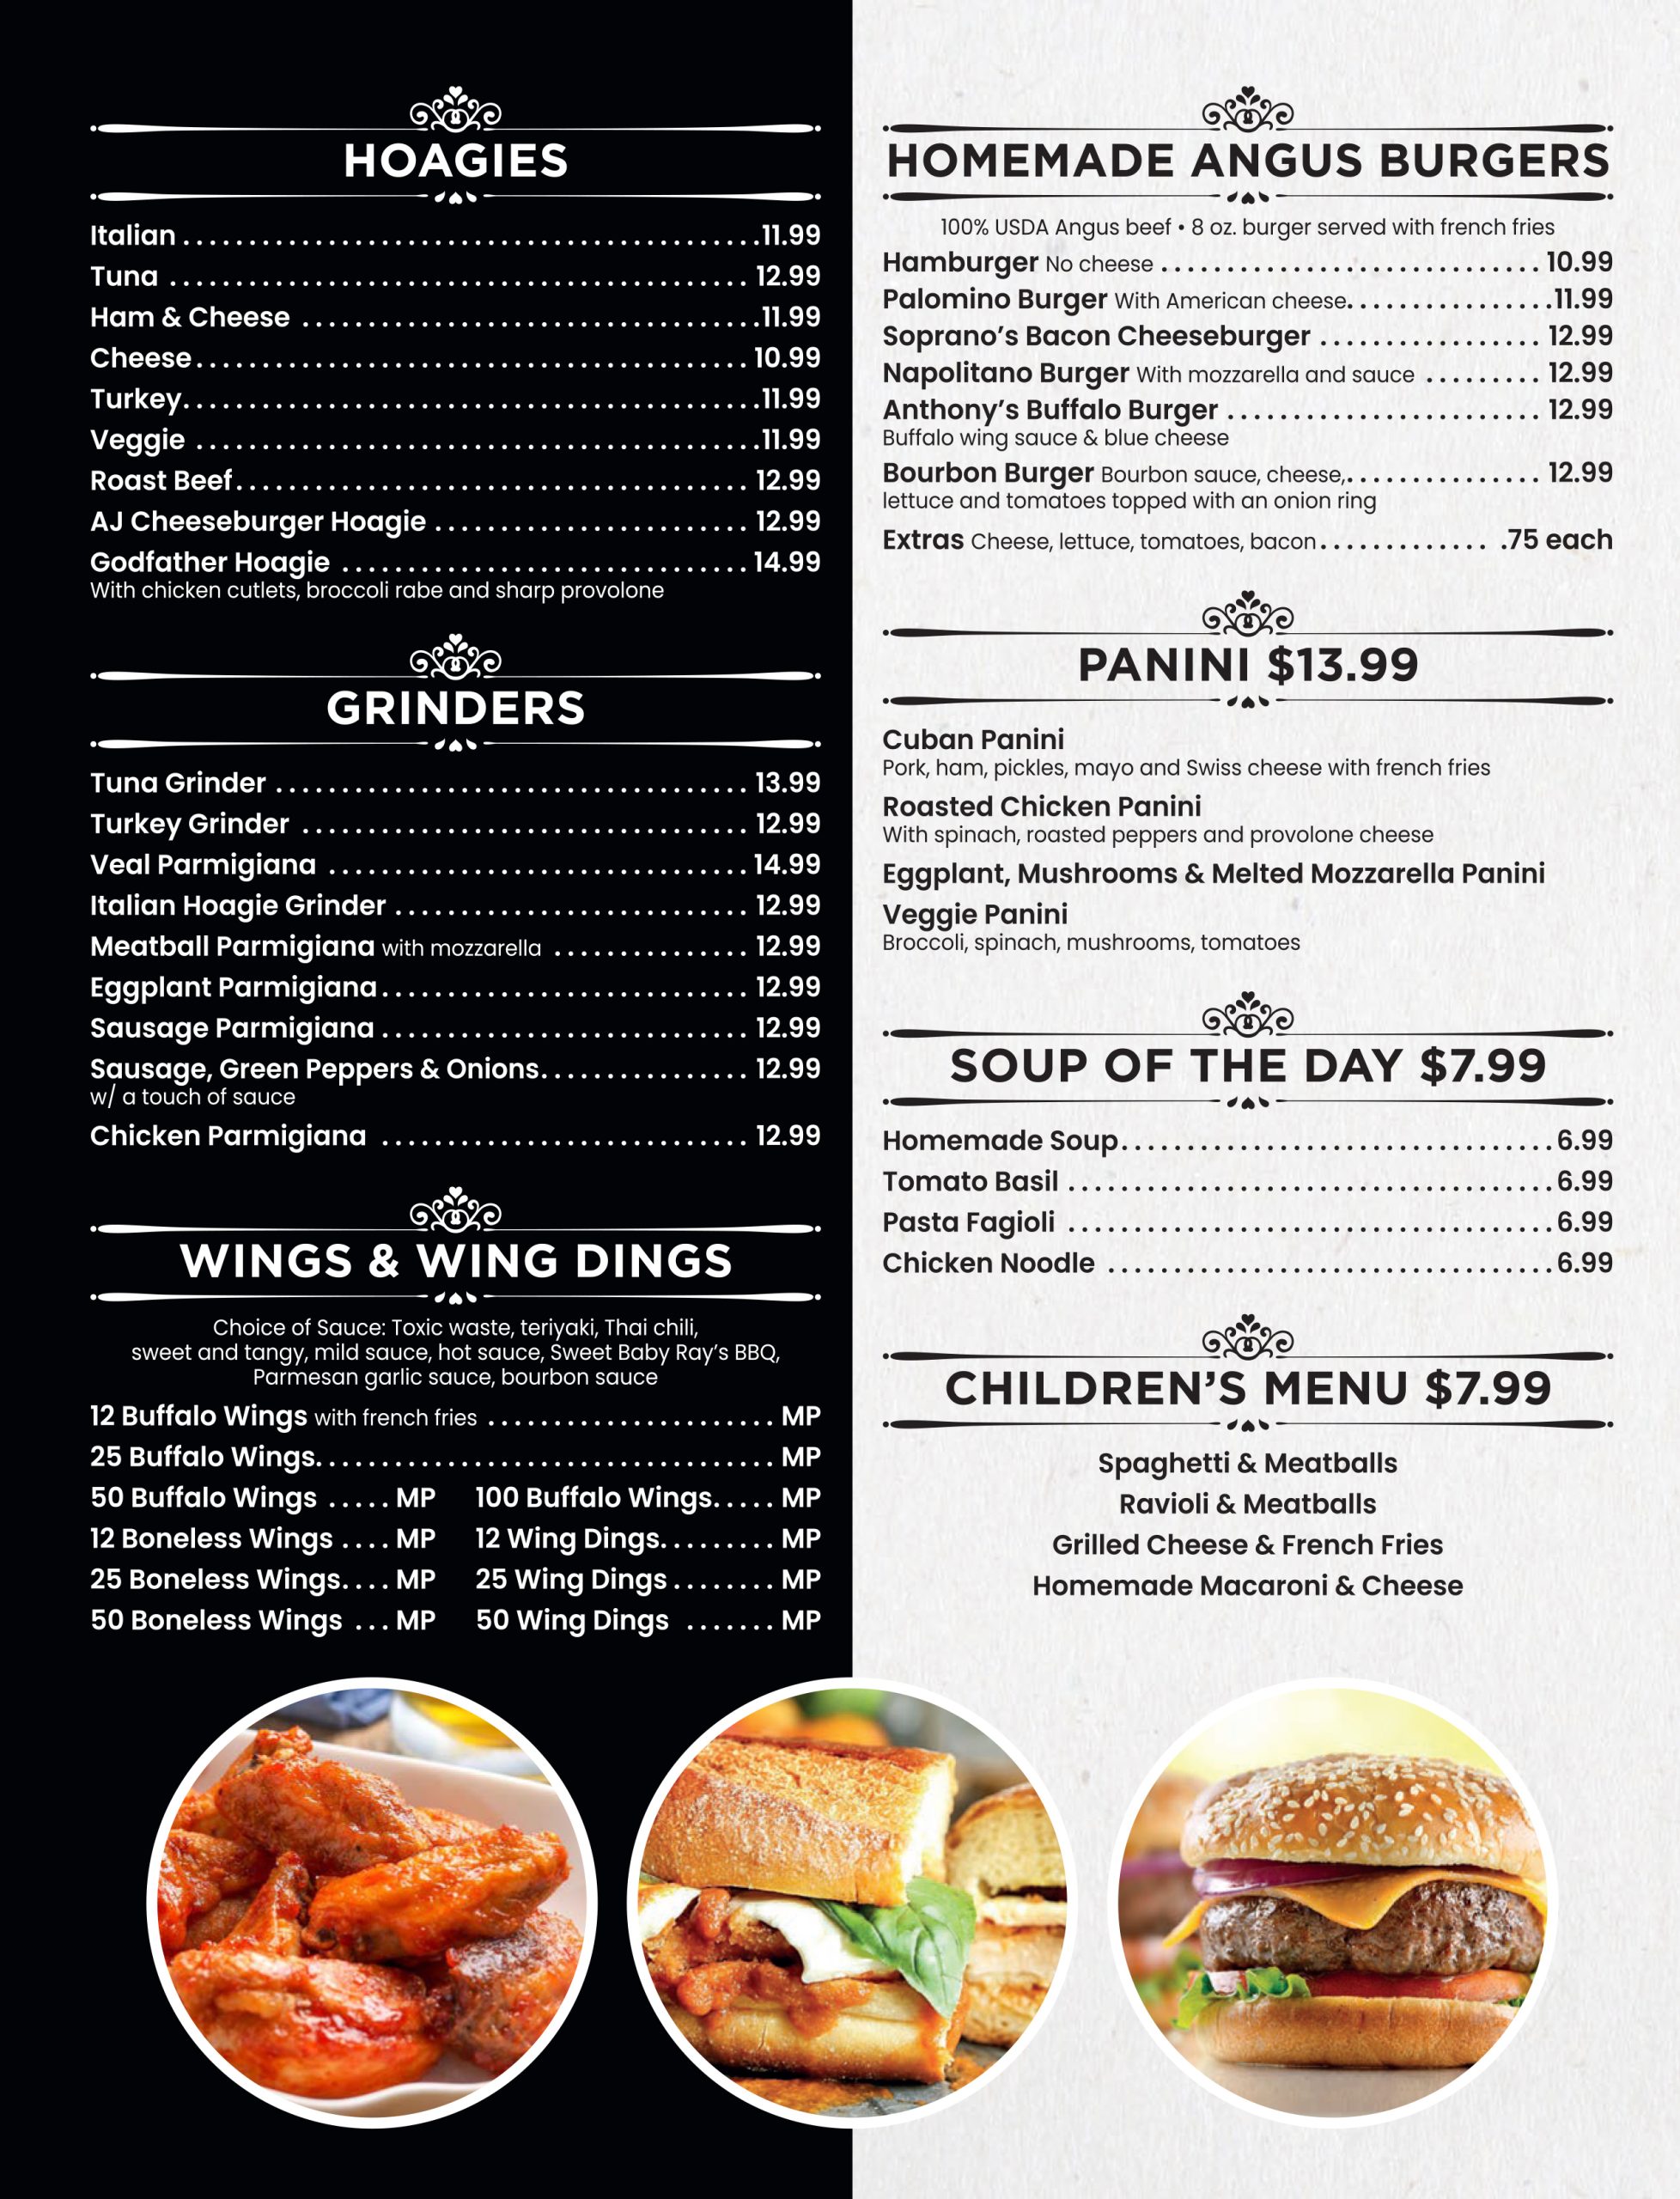 Restaurant menu featuring various food items including hoagies, burgers, grinders, soups, and wings with prices listed.